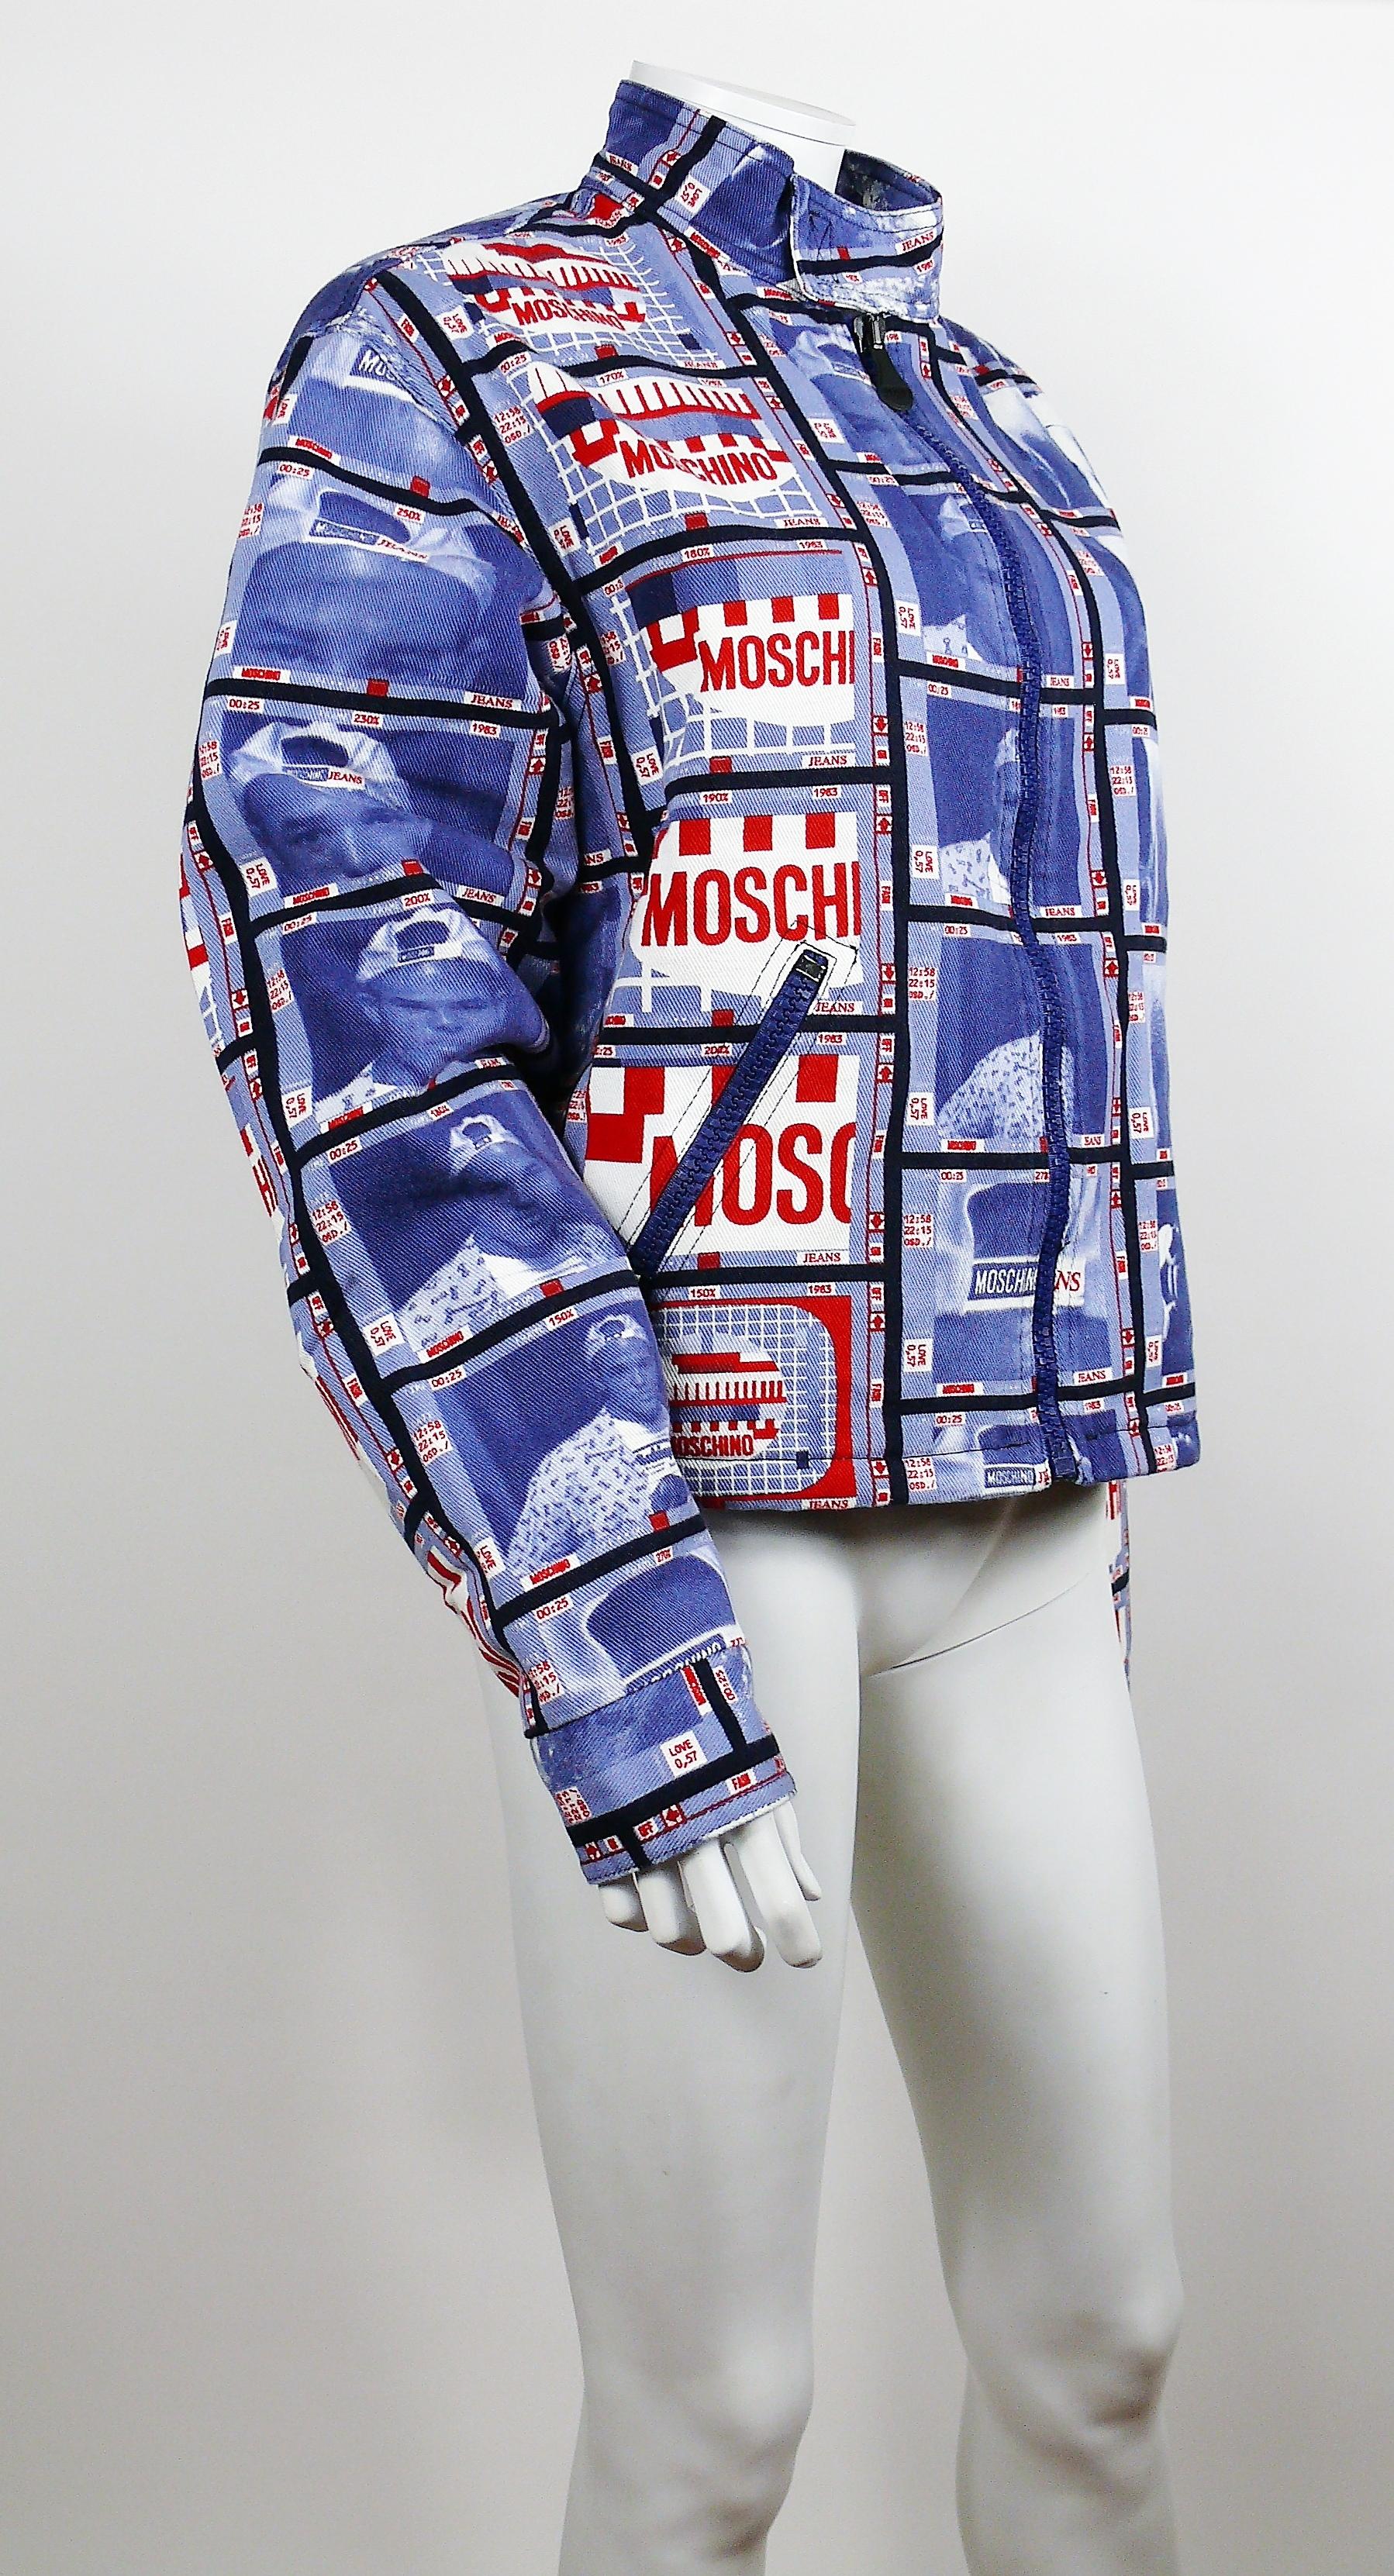 MOSCHINO vintage 1990s rare and iconic TV screen print jacket.

This jacket features :
- Opulent blue/white/red TV screen print with MOSCHINO all over.
- Mandarin collar with velcro closure.
- Front zipper closure.
- Two zippered side pockets.
-